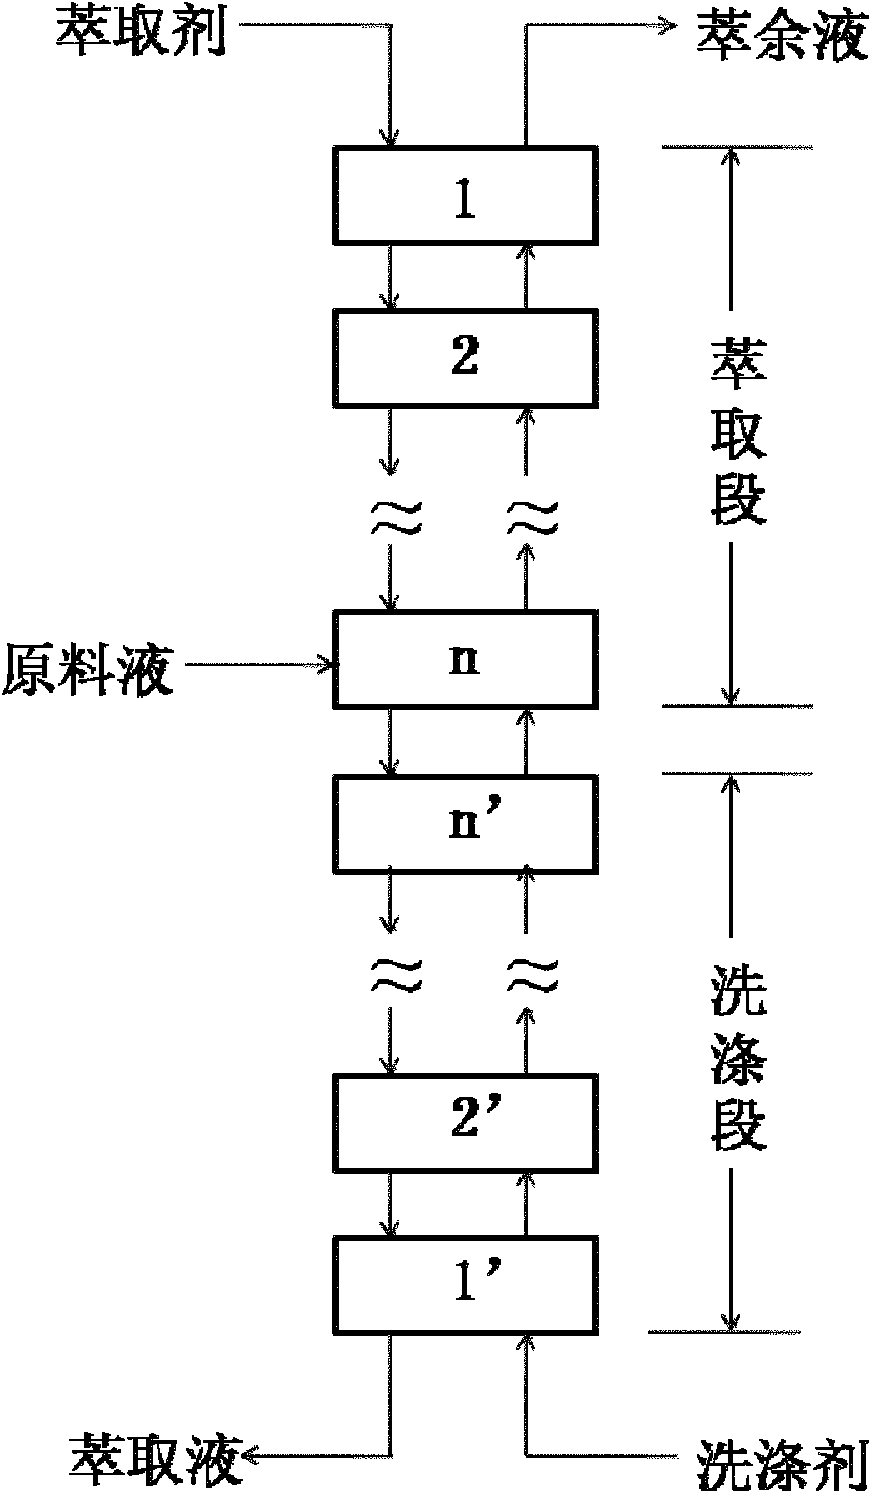 Method for separating ginkgolide B from ginkgolide mixture